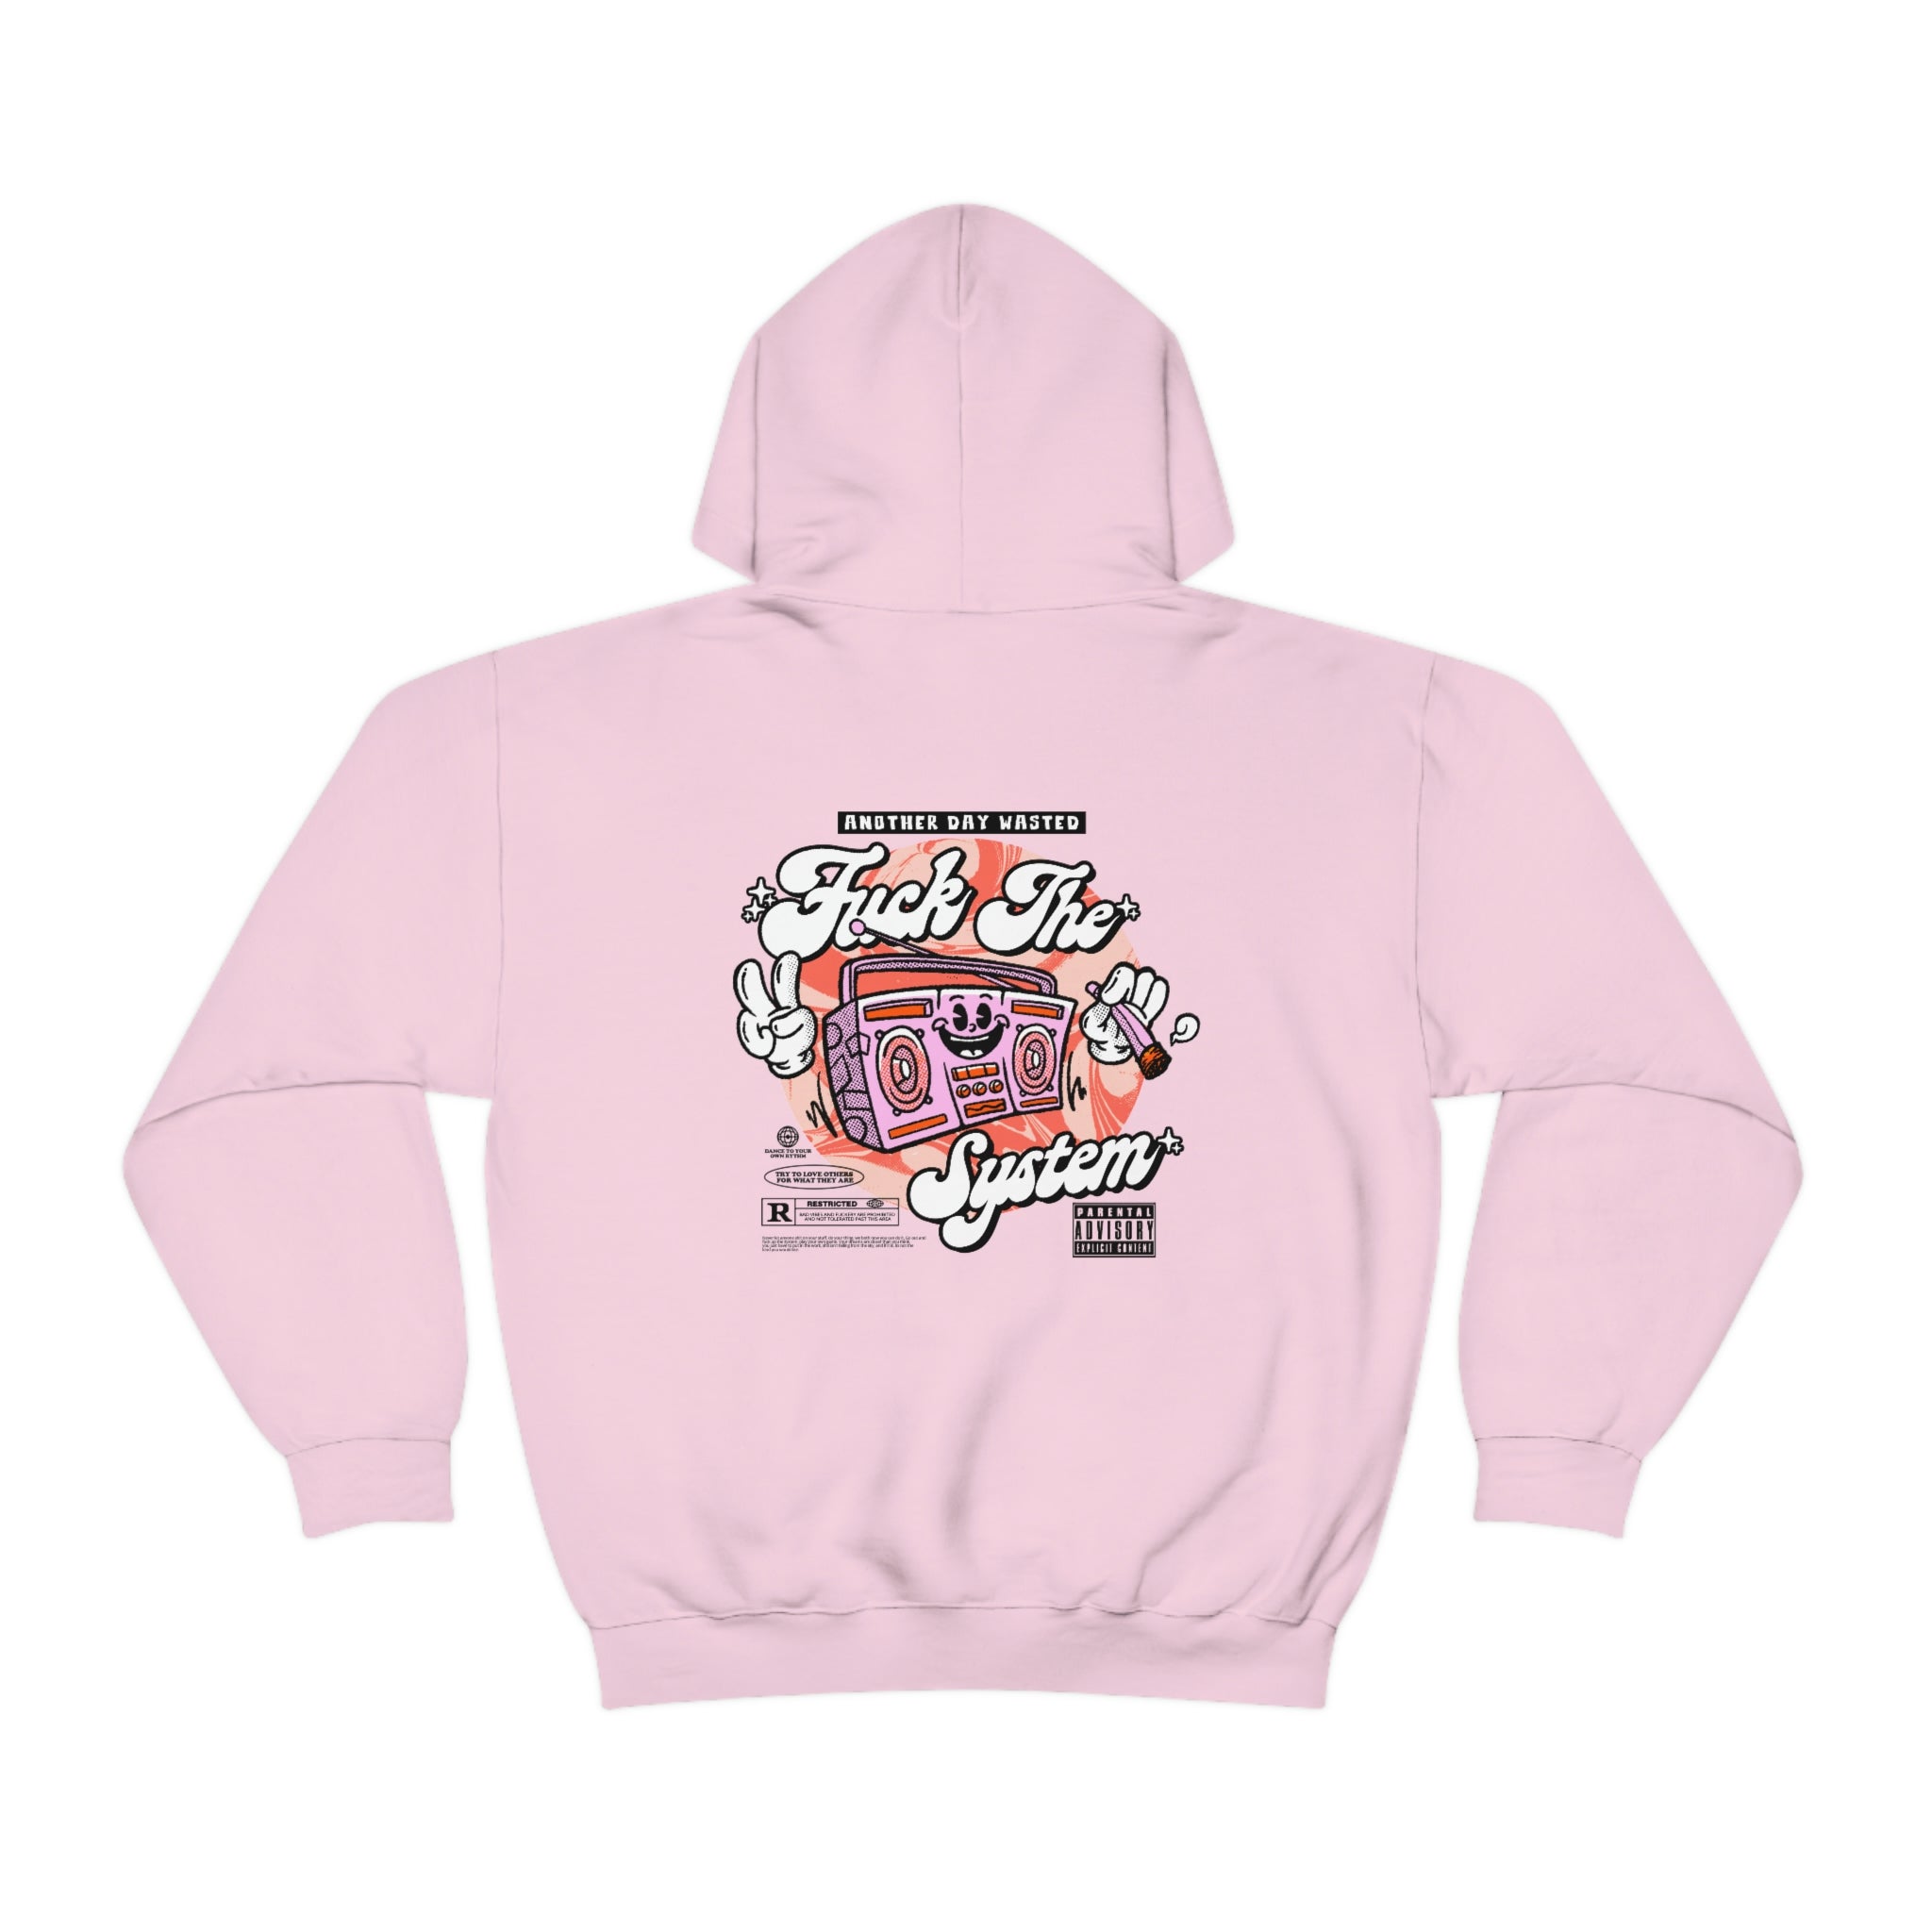 SYSTEM HOODY / PINK